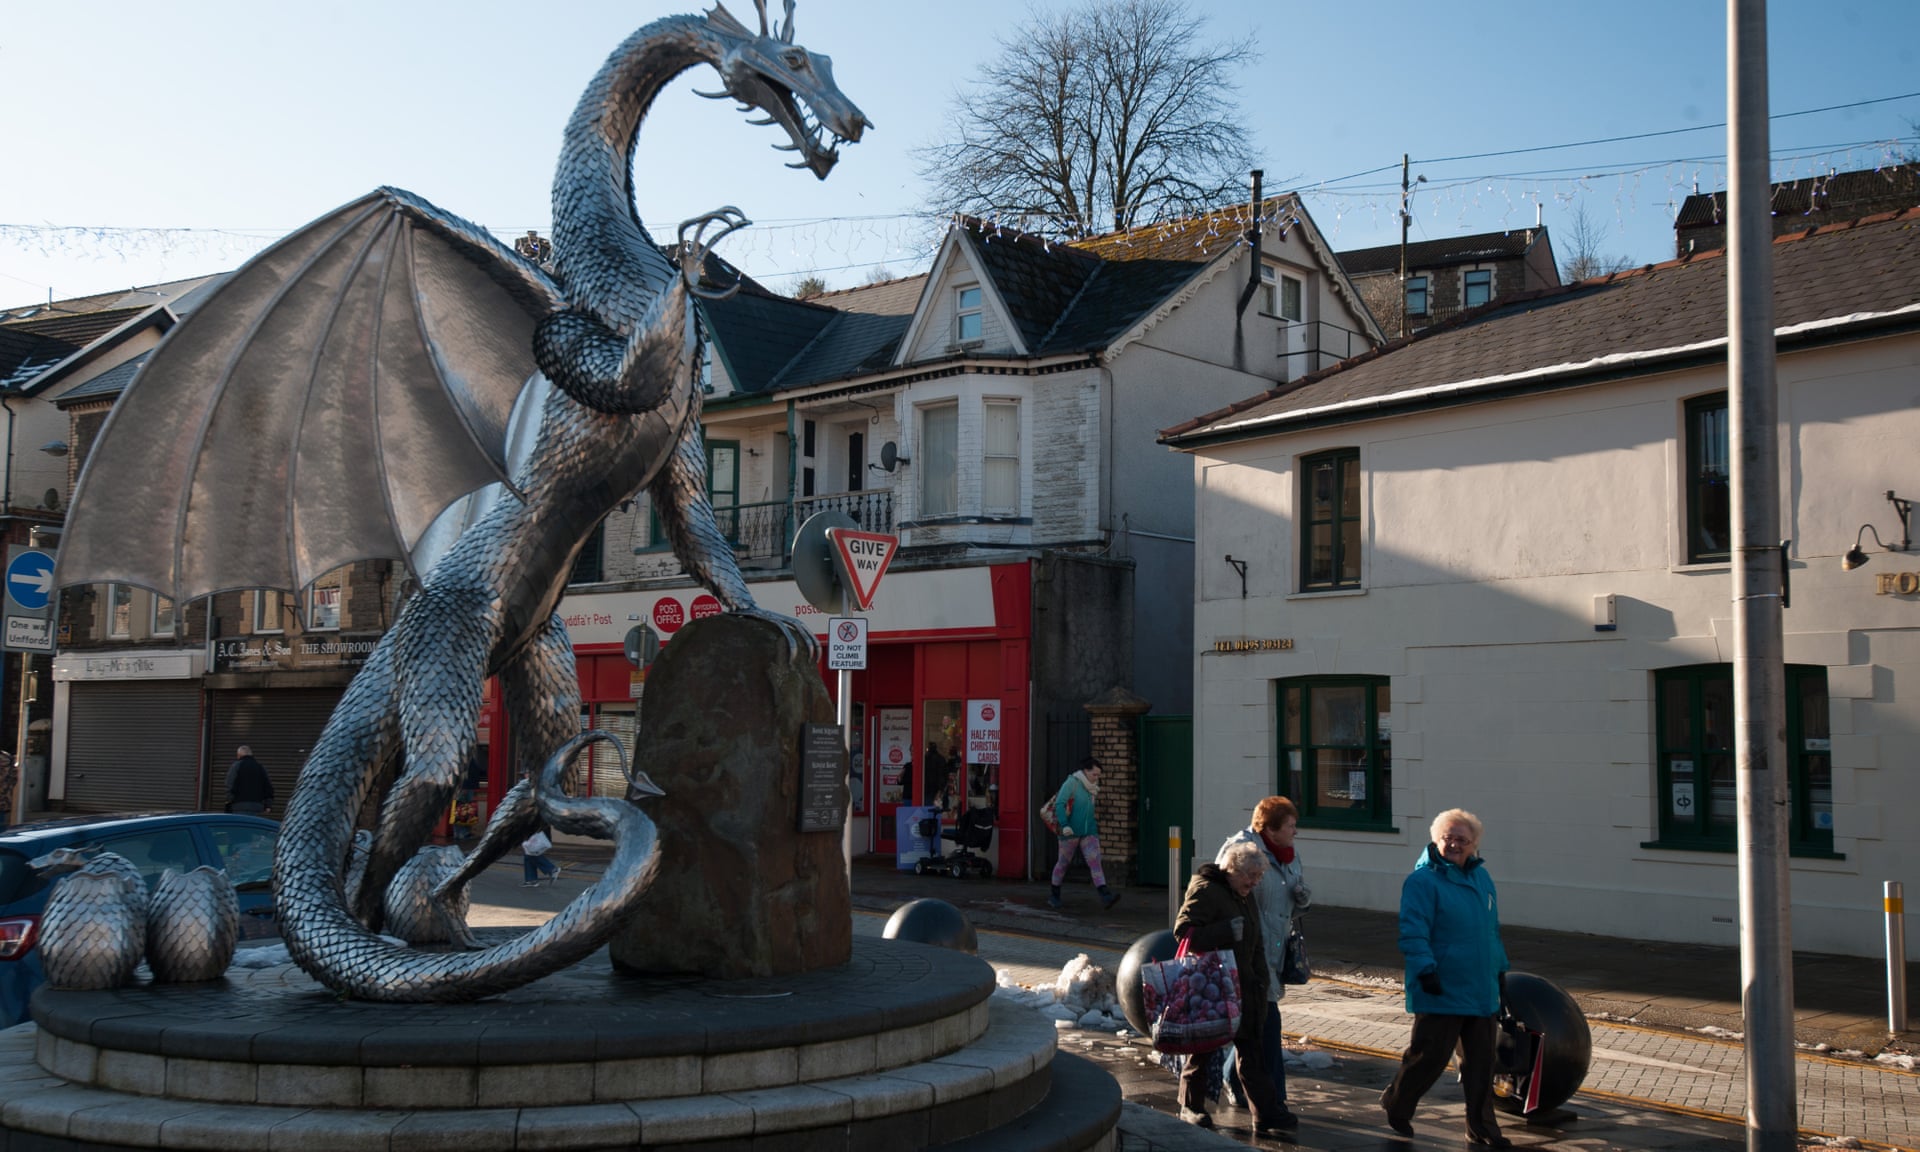 Ebbw Vale in south Wales. ‘A town that’s suffered greatly over the last 20 years.’ Photograph: Richard Jones/The Guardian